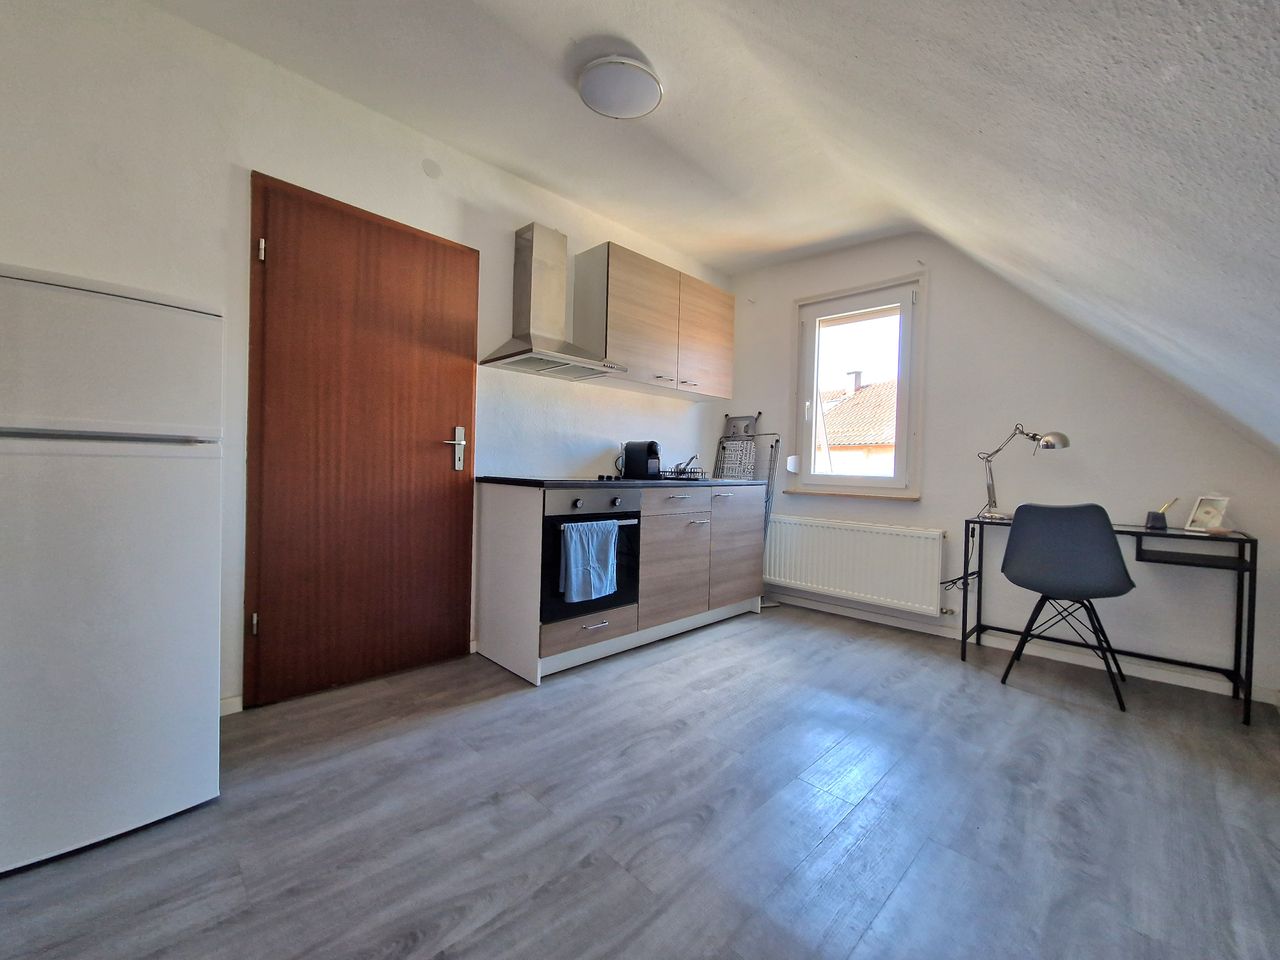 Furnished & fully equipped attic apartment with a quiet location with good connections